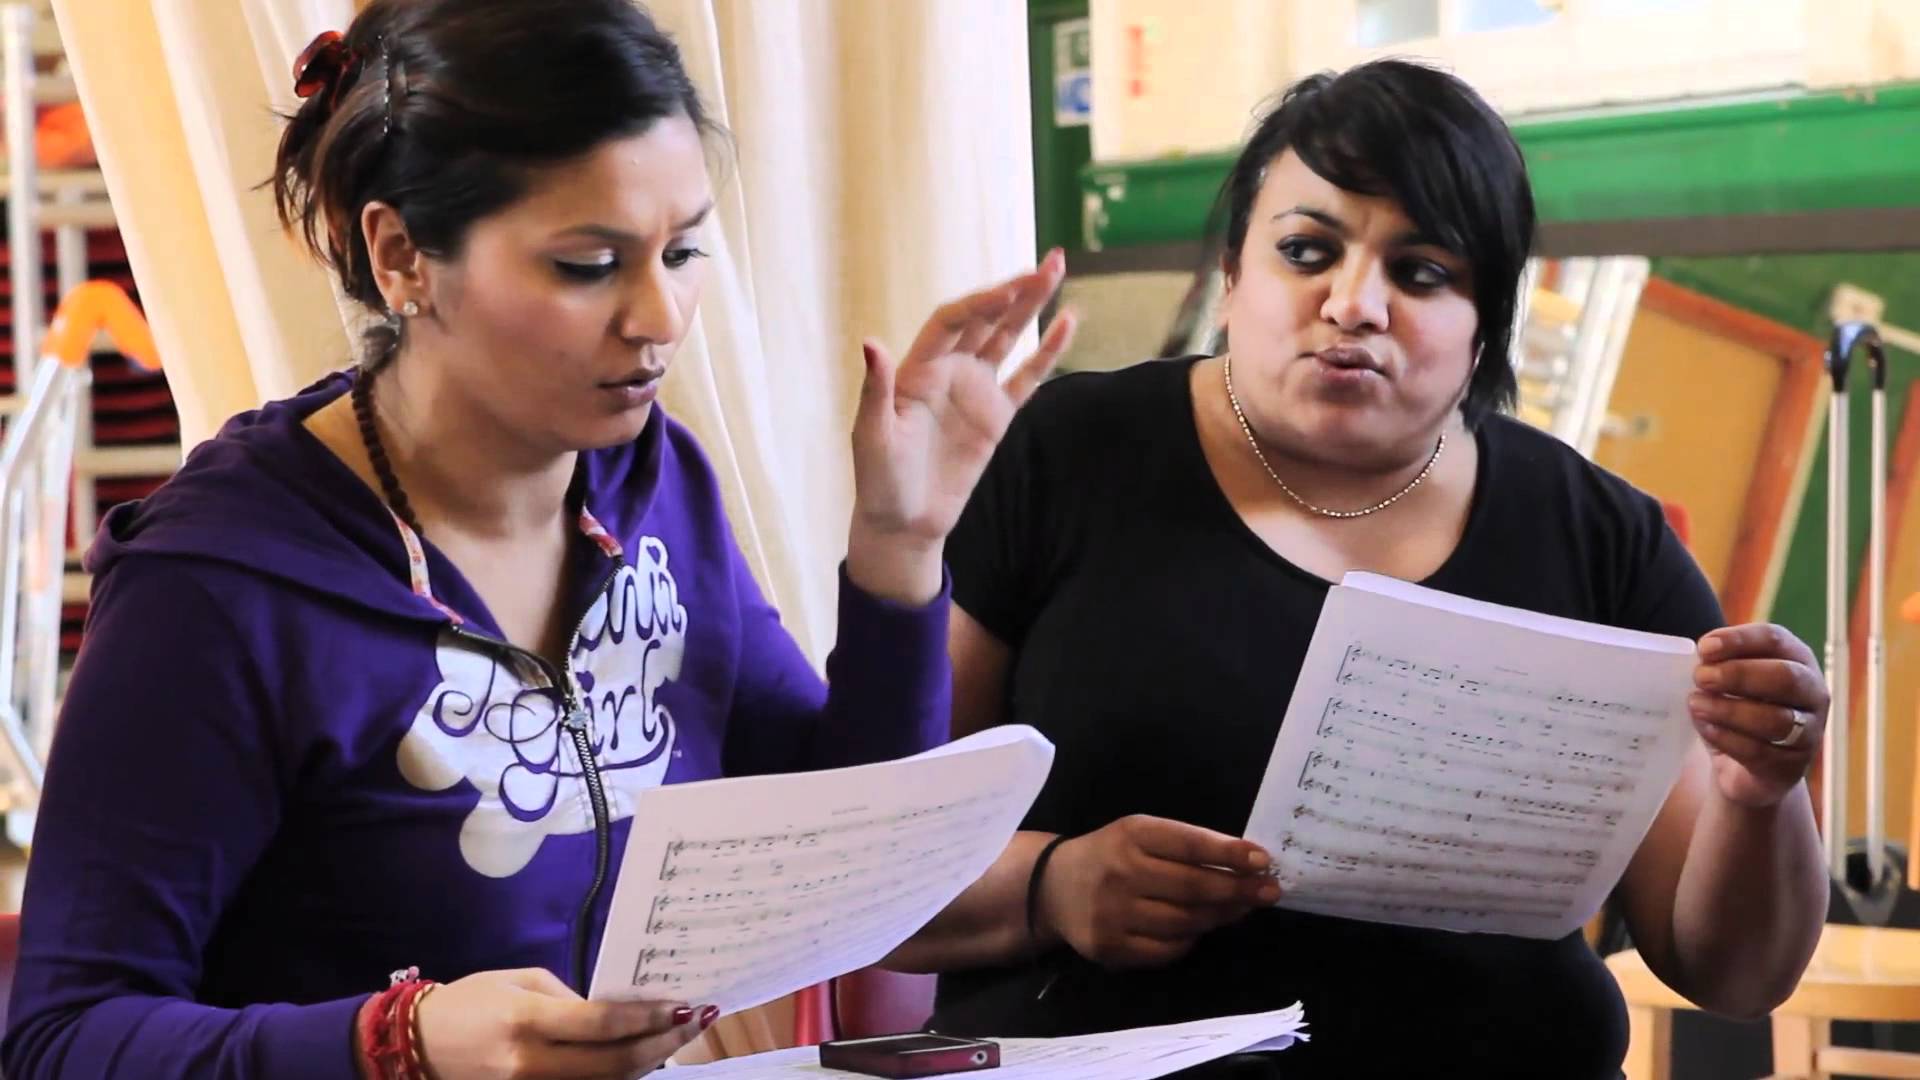 Two women engaged in a discussion over a sheet of music.